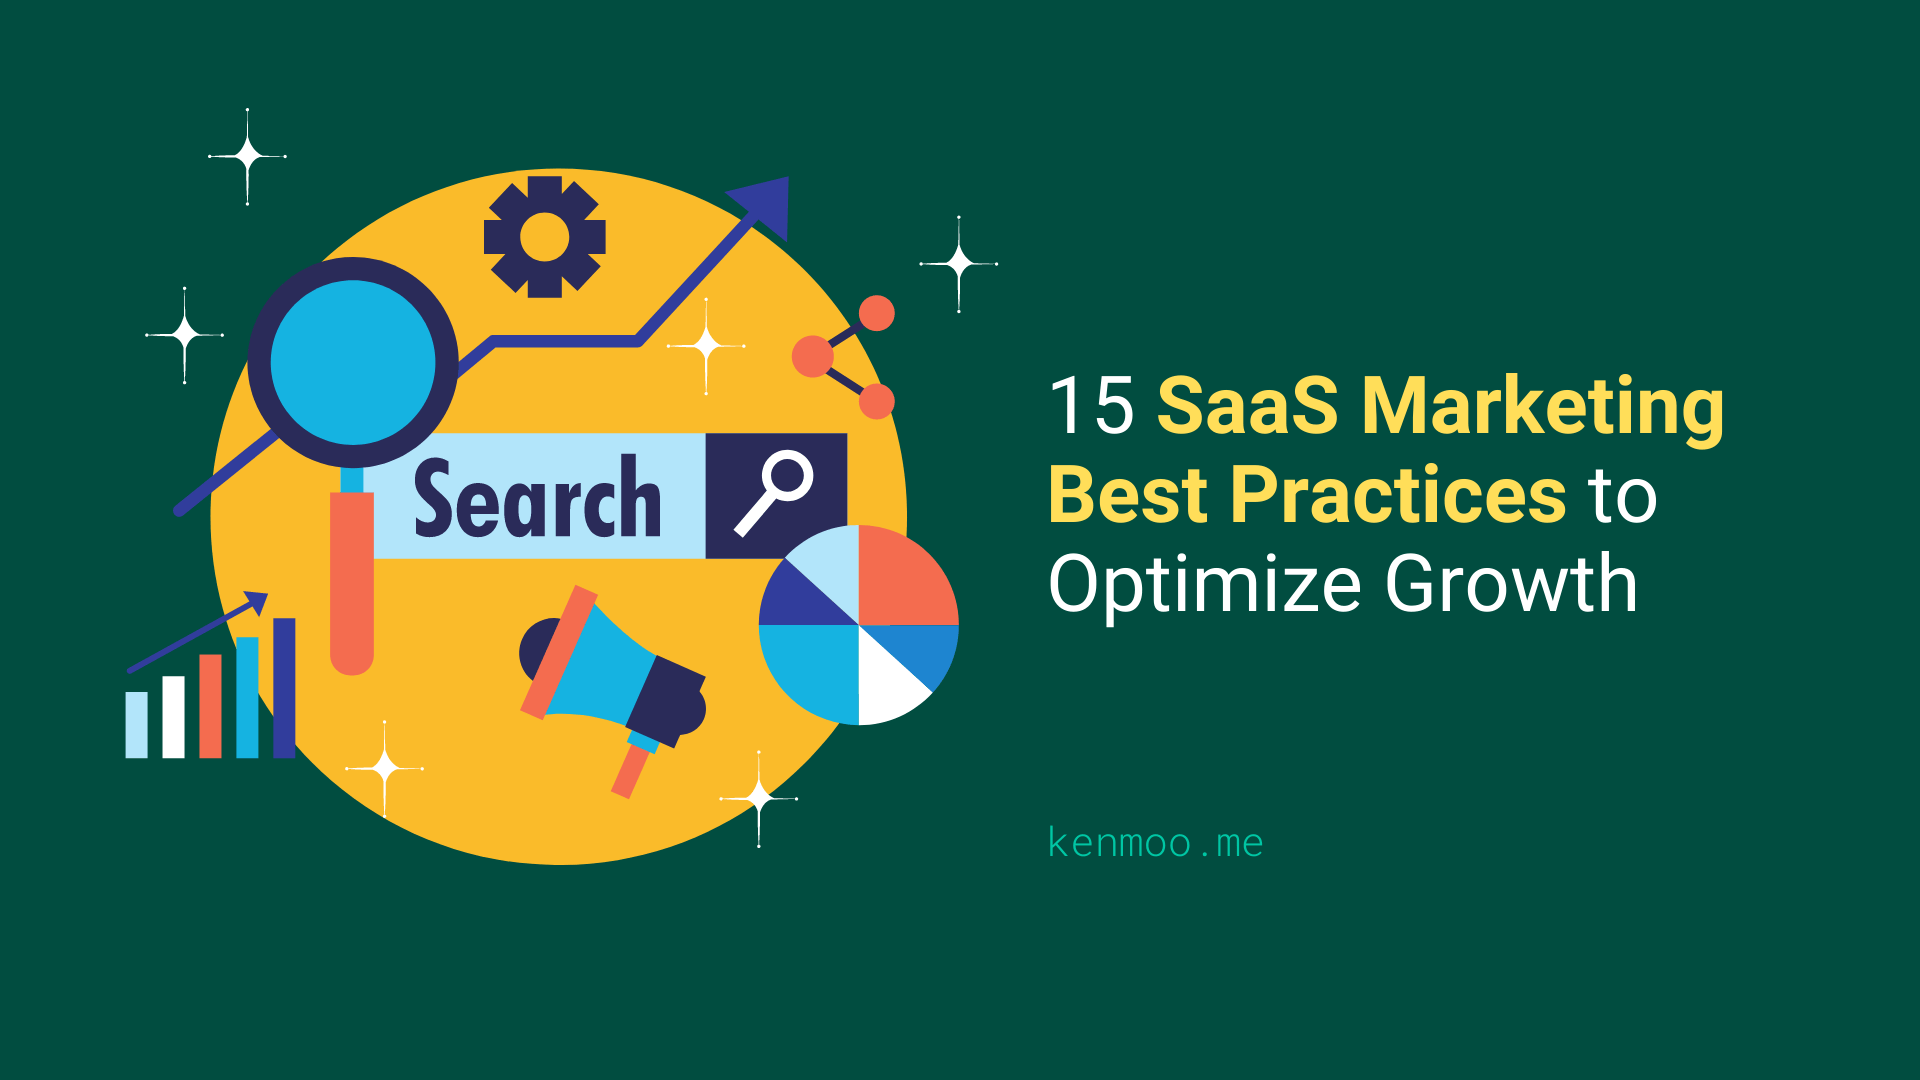 15 SaaS Marketing Best Practices to Optimize Growth